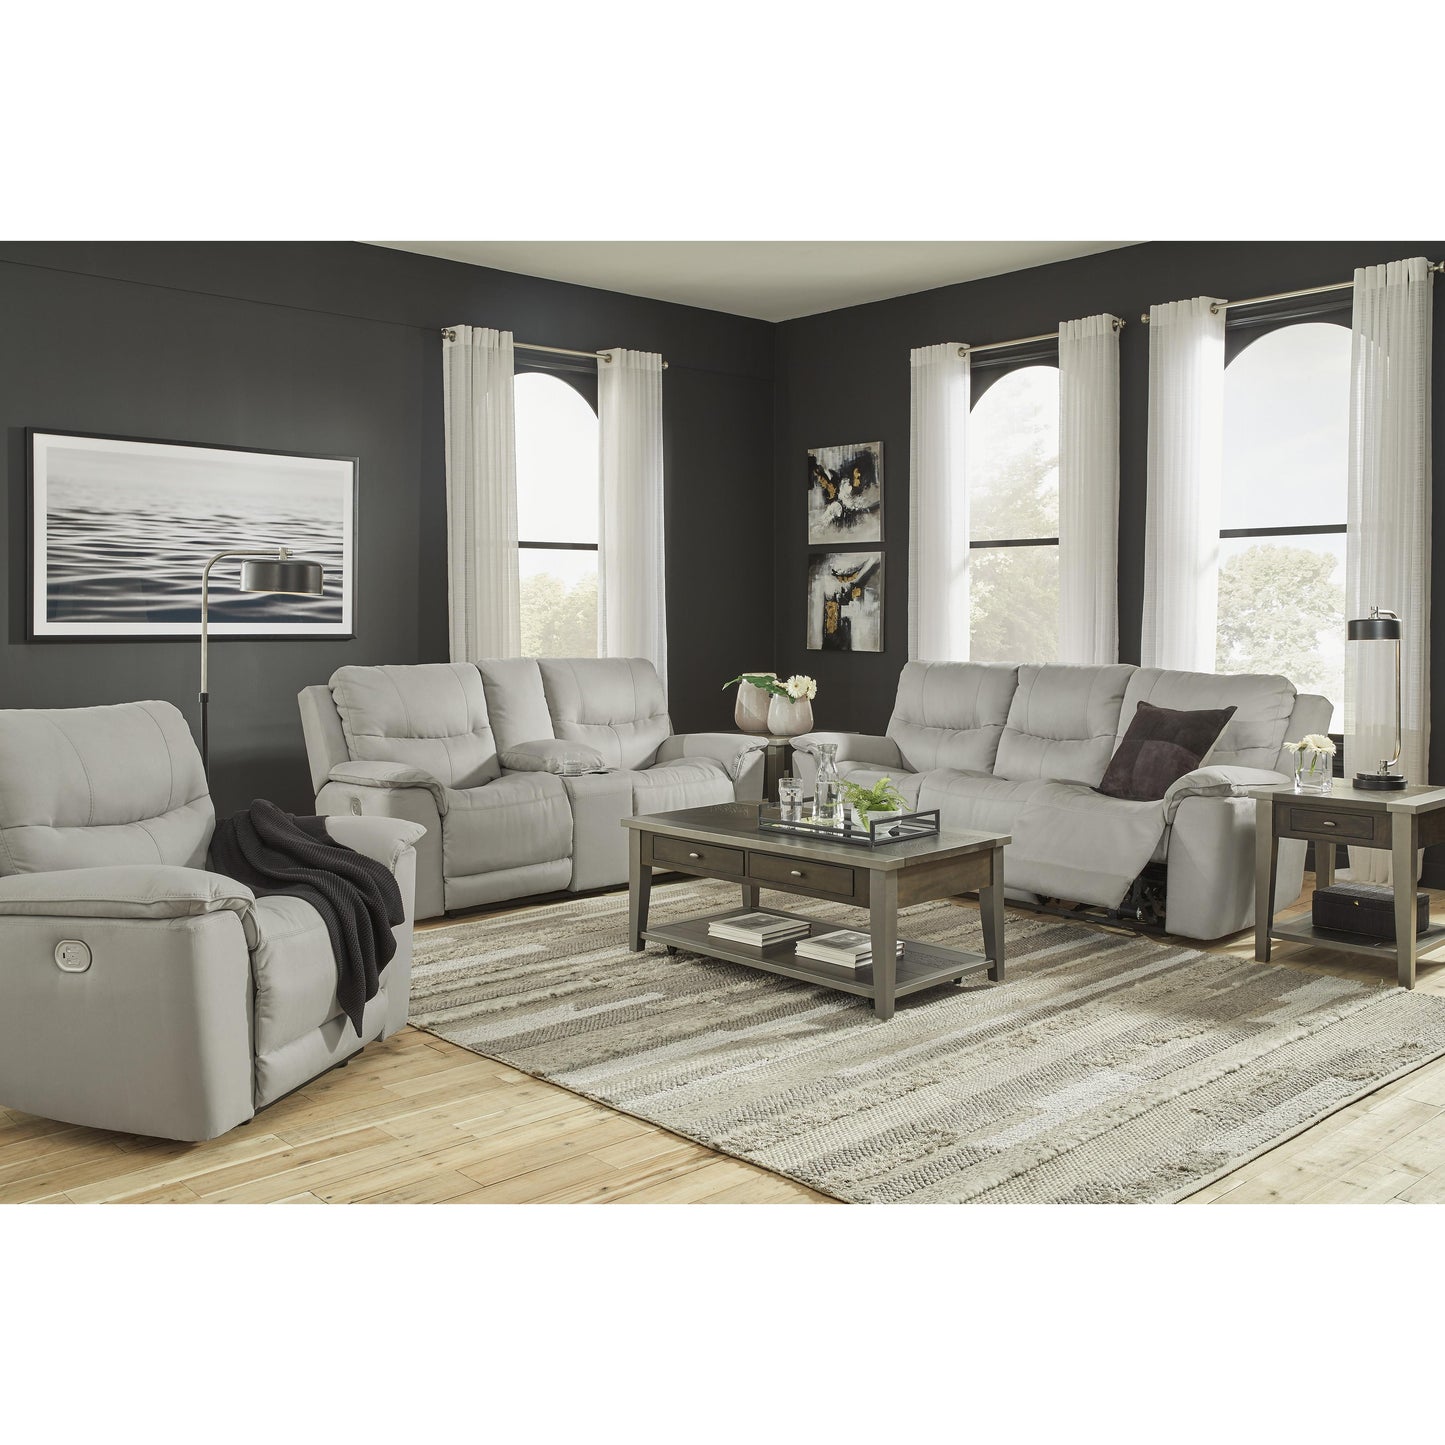 Signature Design by Ashley Next-Gen Gaucho Power Reclining Leather Look Sofa 6080615 IMAGE 14